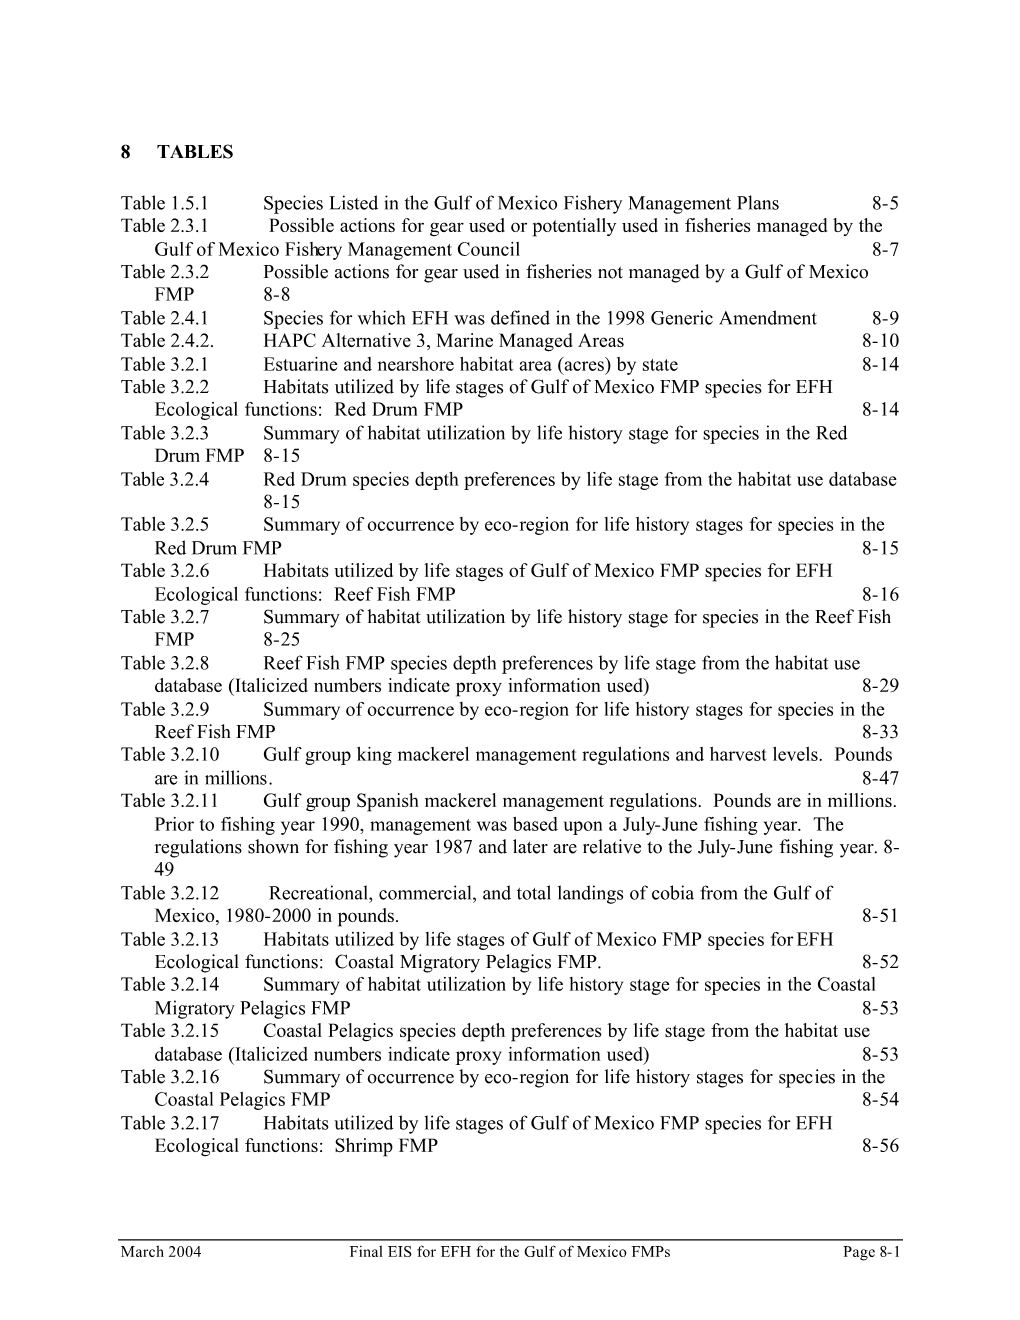 March 2004 EFH EIS Section 8 – Tables